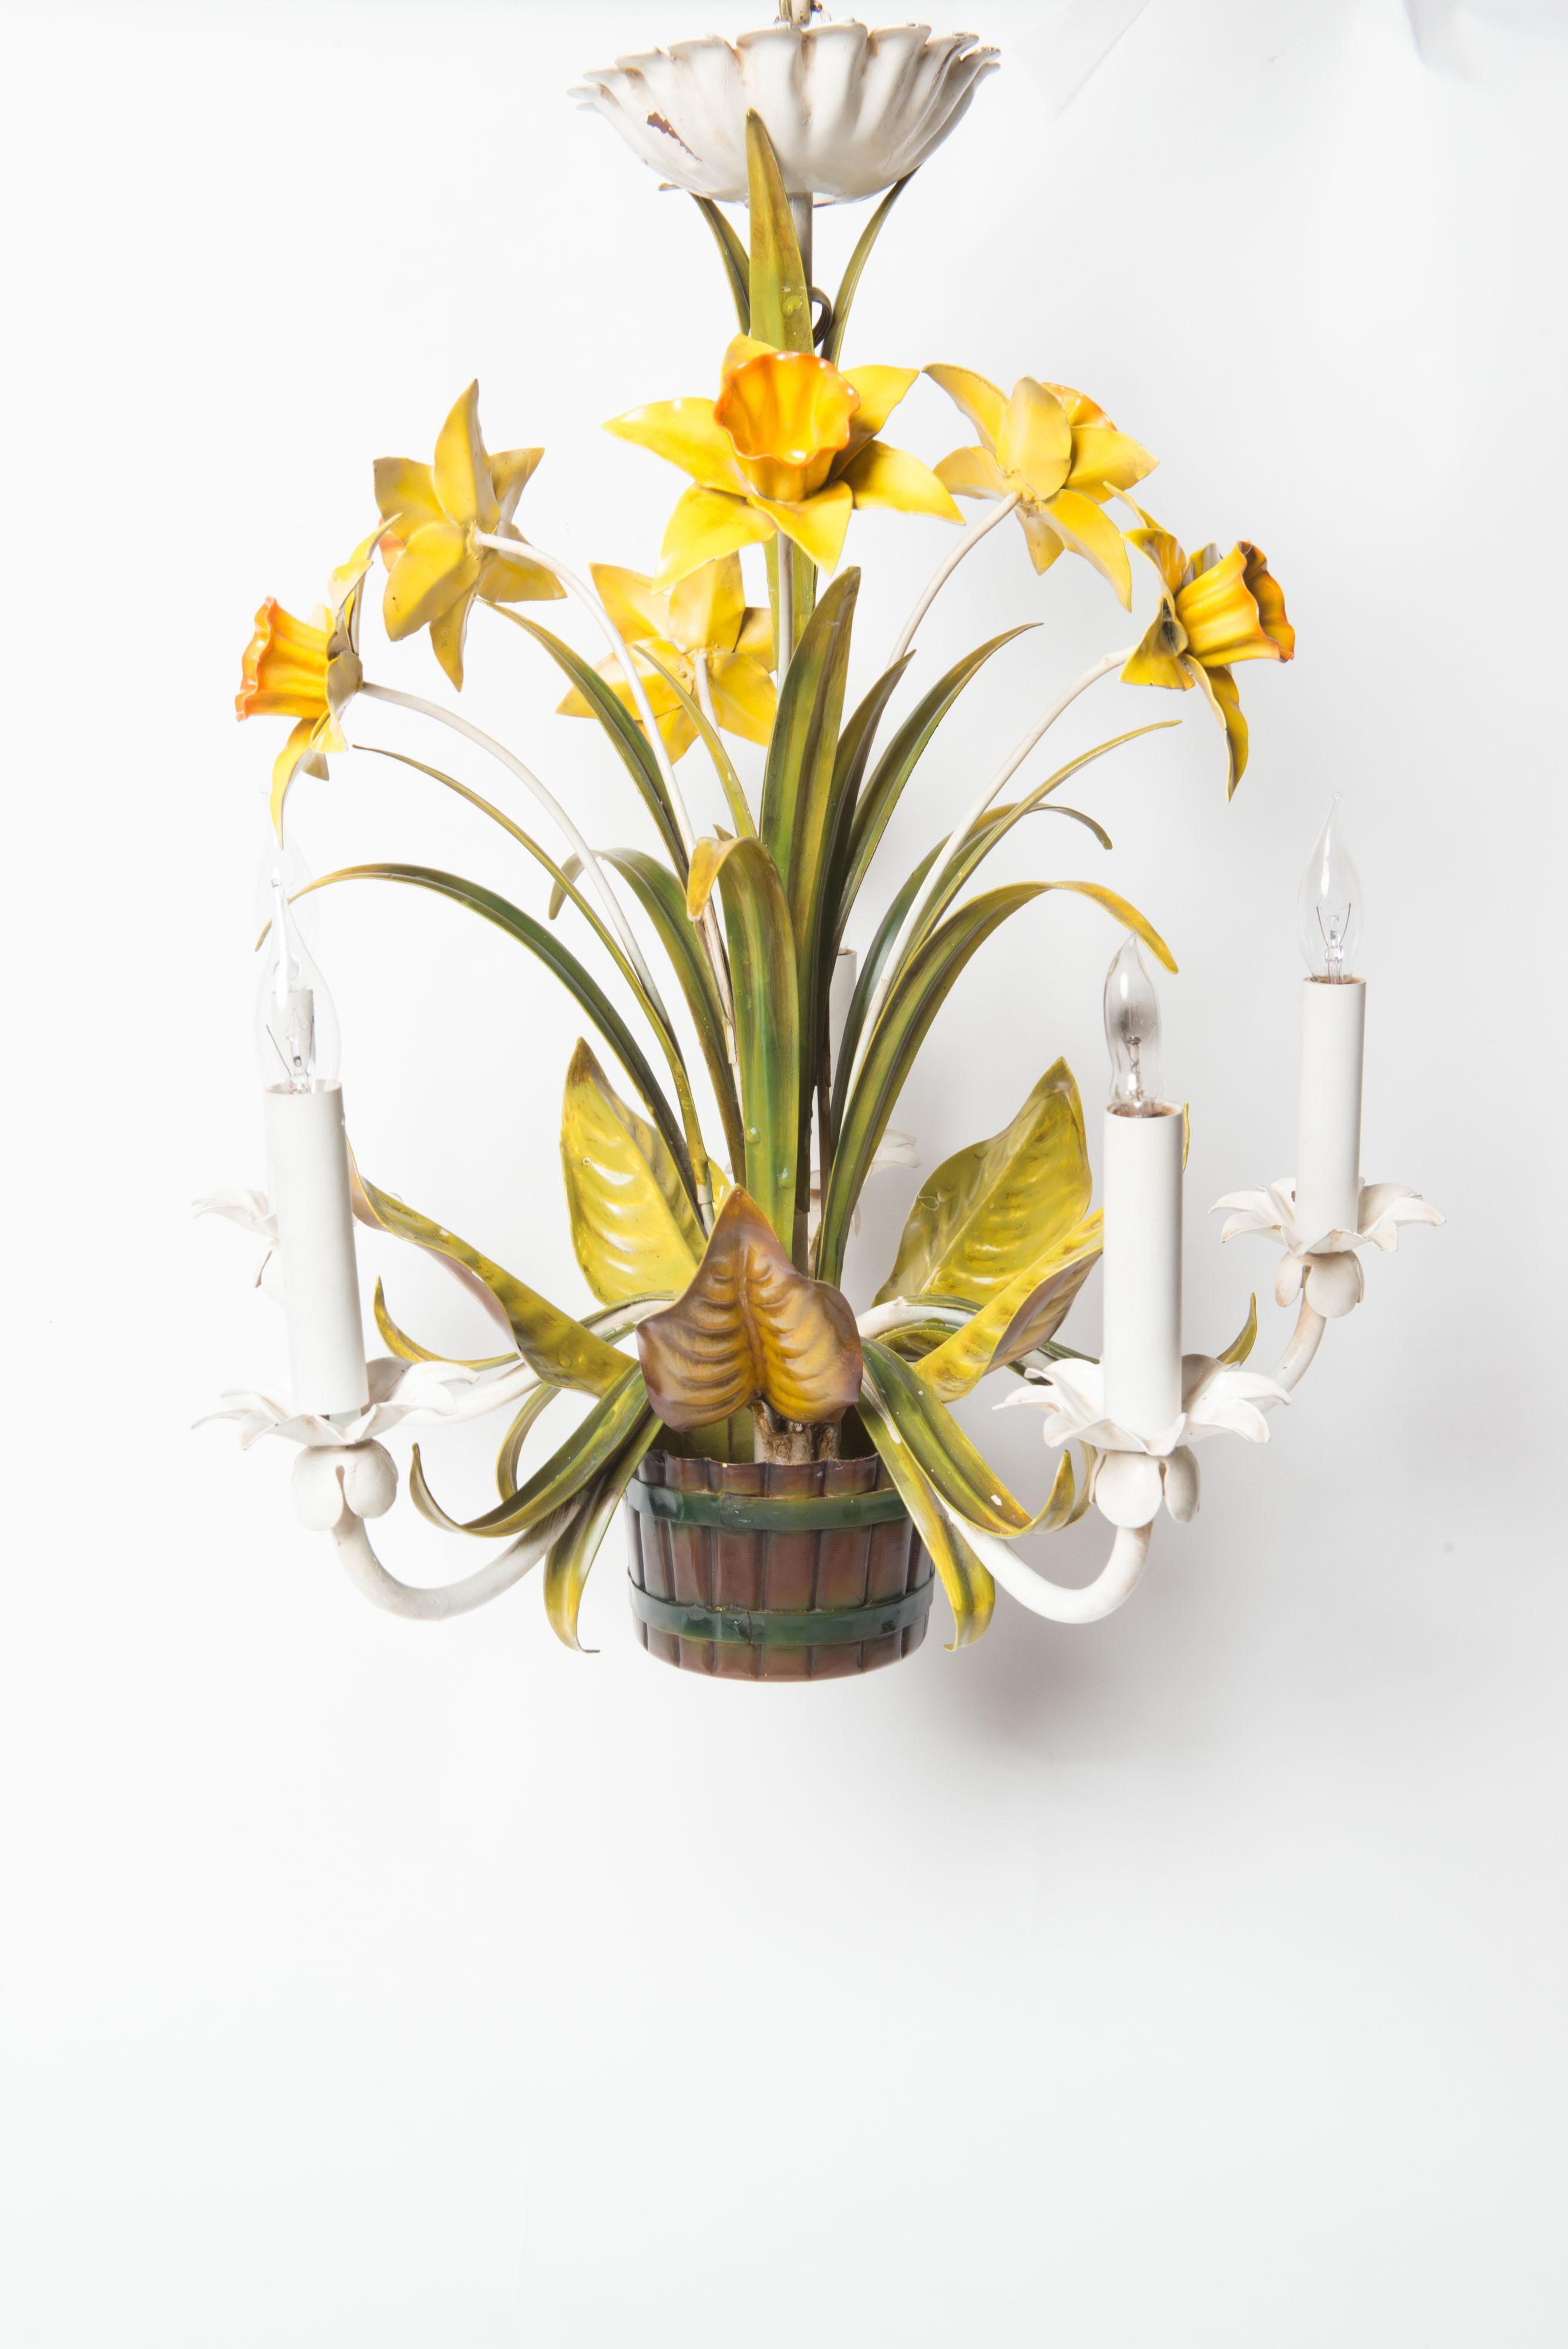 Italian metal floral chandelier with yellow daffodils and large leaves in brown slat and green banded metal basket. All original paint in good condition. Five arm chandelier with five sockets for chandelier bulbs. Original canopy included.